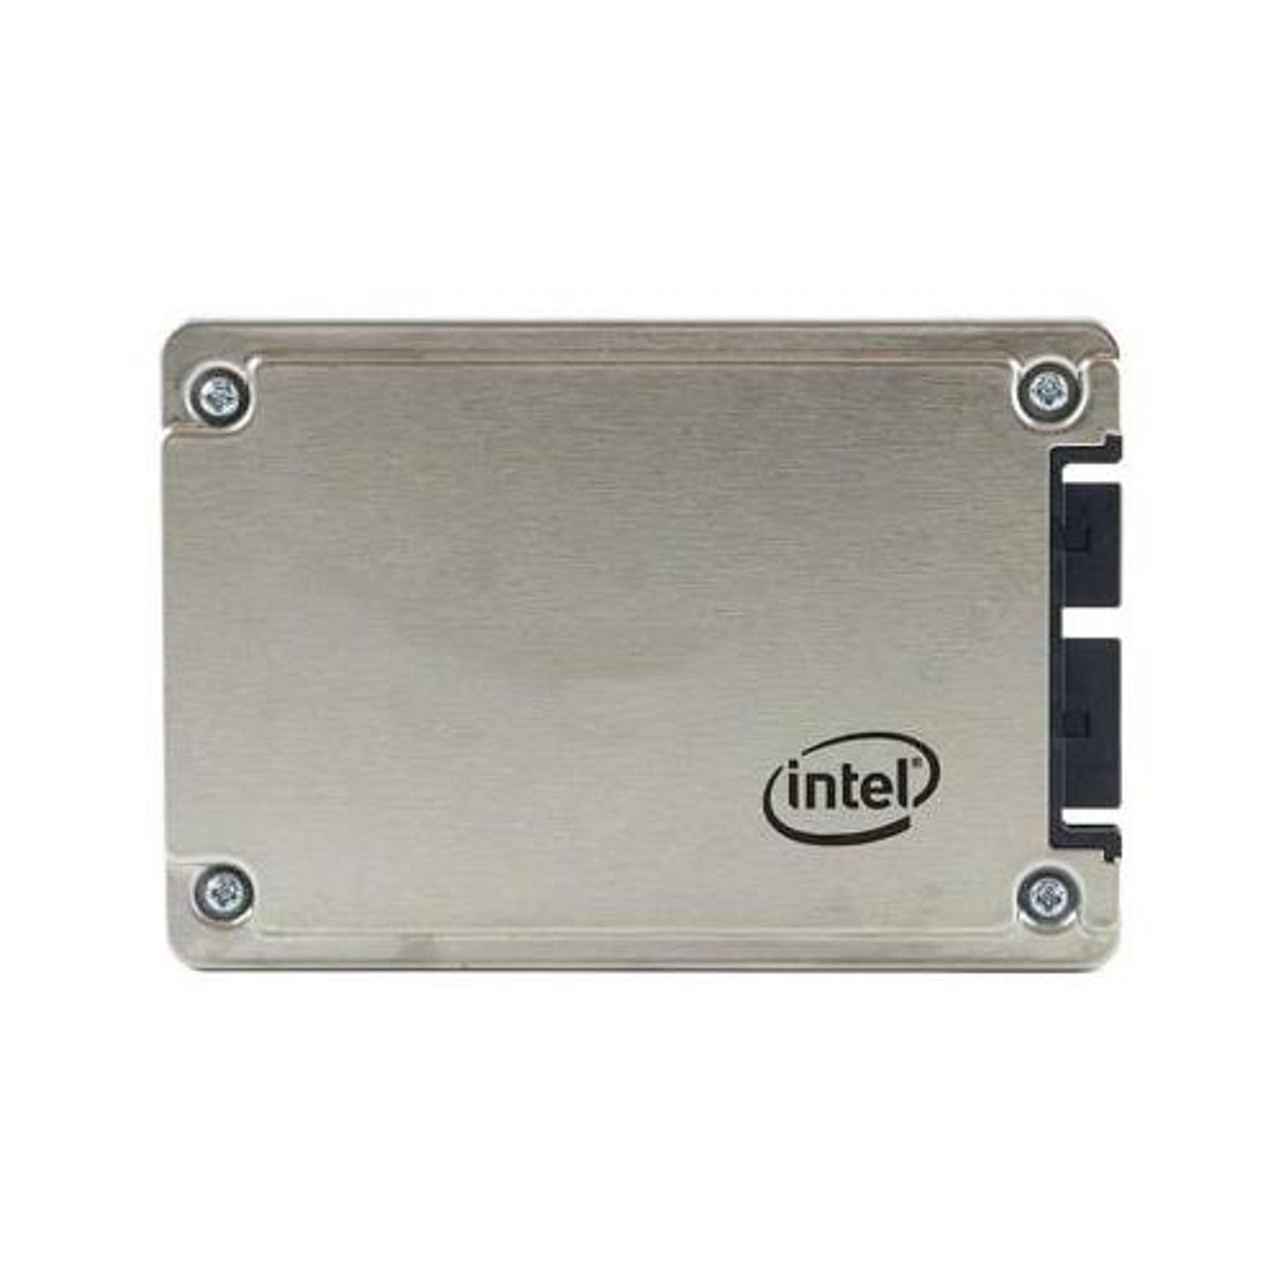 SSDSA1NW080G3 Intel SATA 3.0 Gbps 80GB Solid State Drive